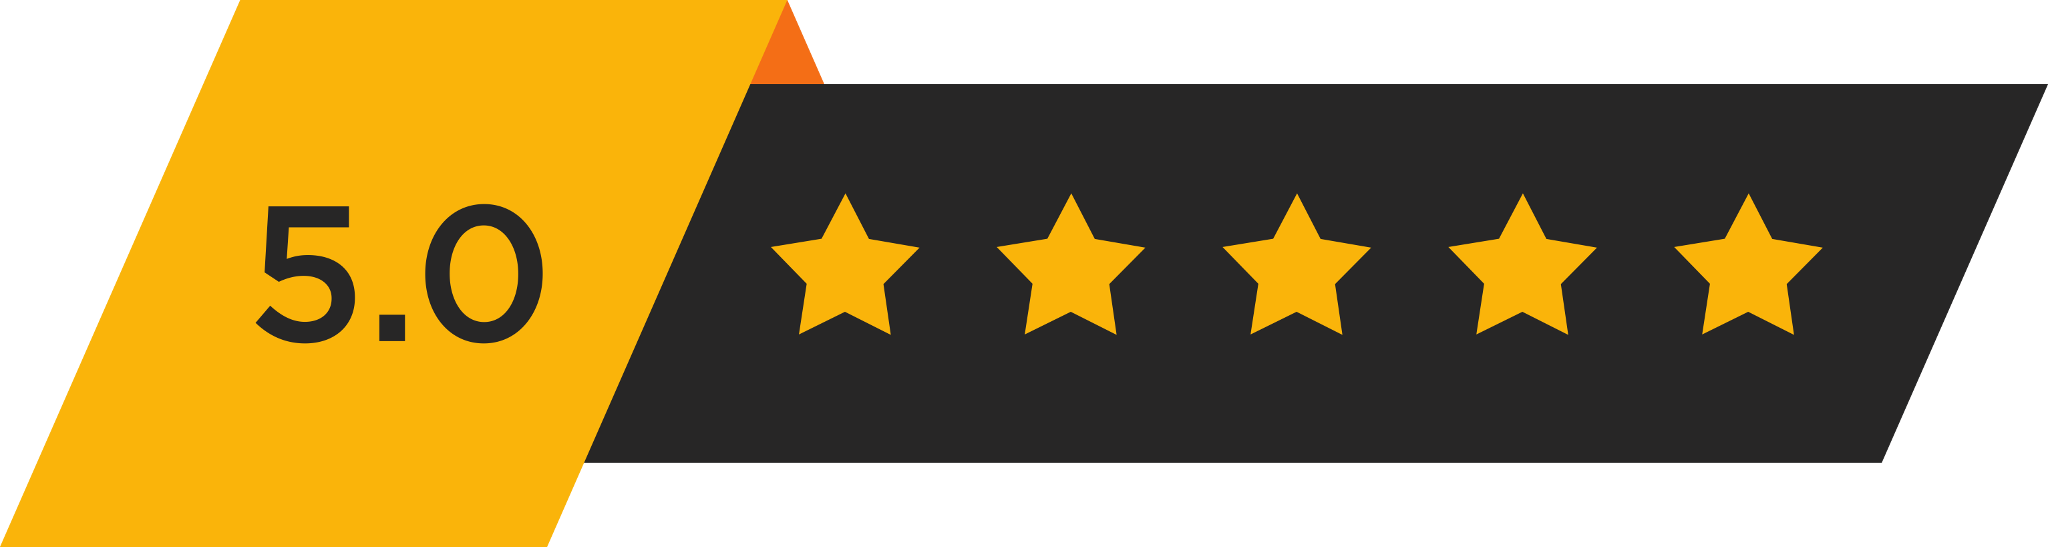 5 Star Rating Scale